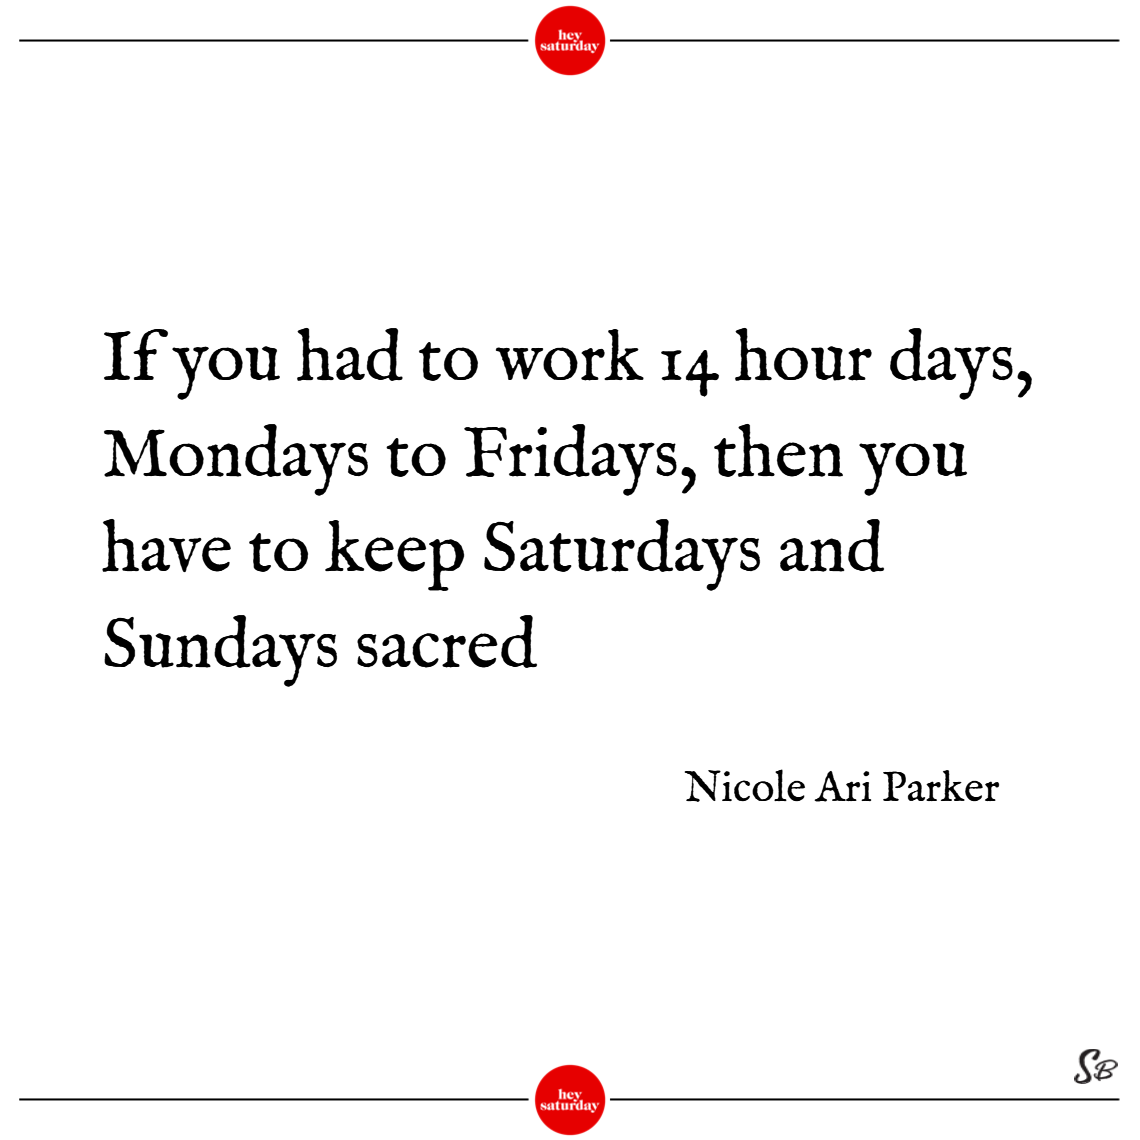 If you had to work 14 hour days, mondays to fridays, then you have to keep saturdays and sundays sacred. - nicole ari parker